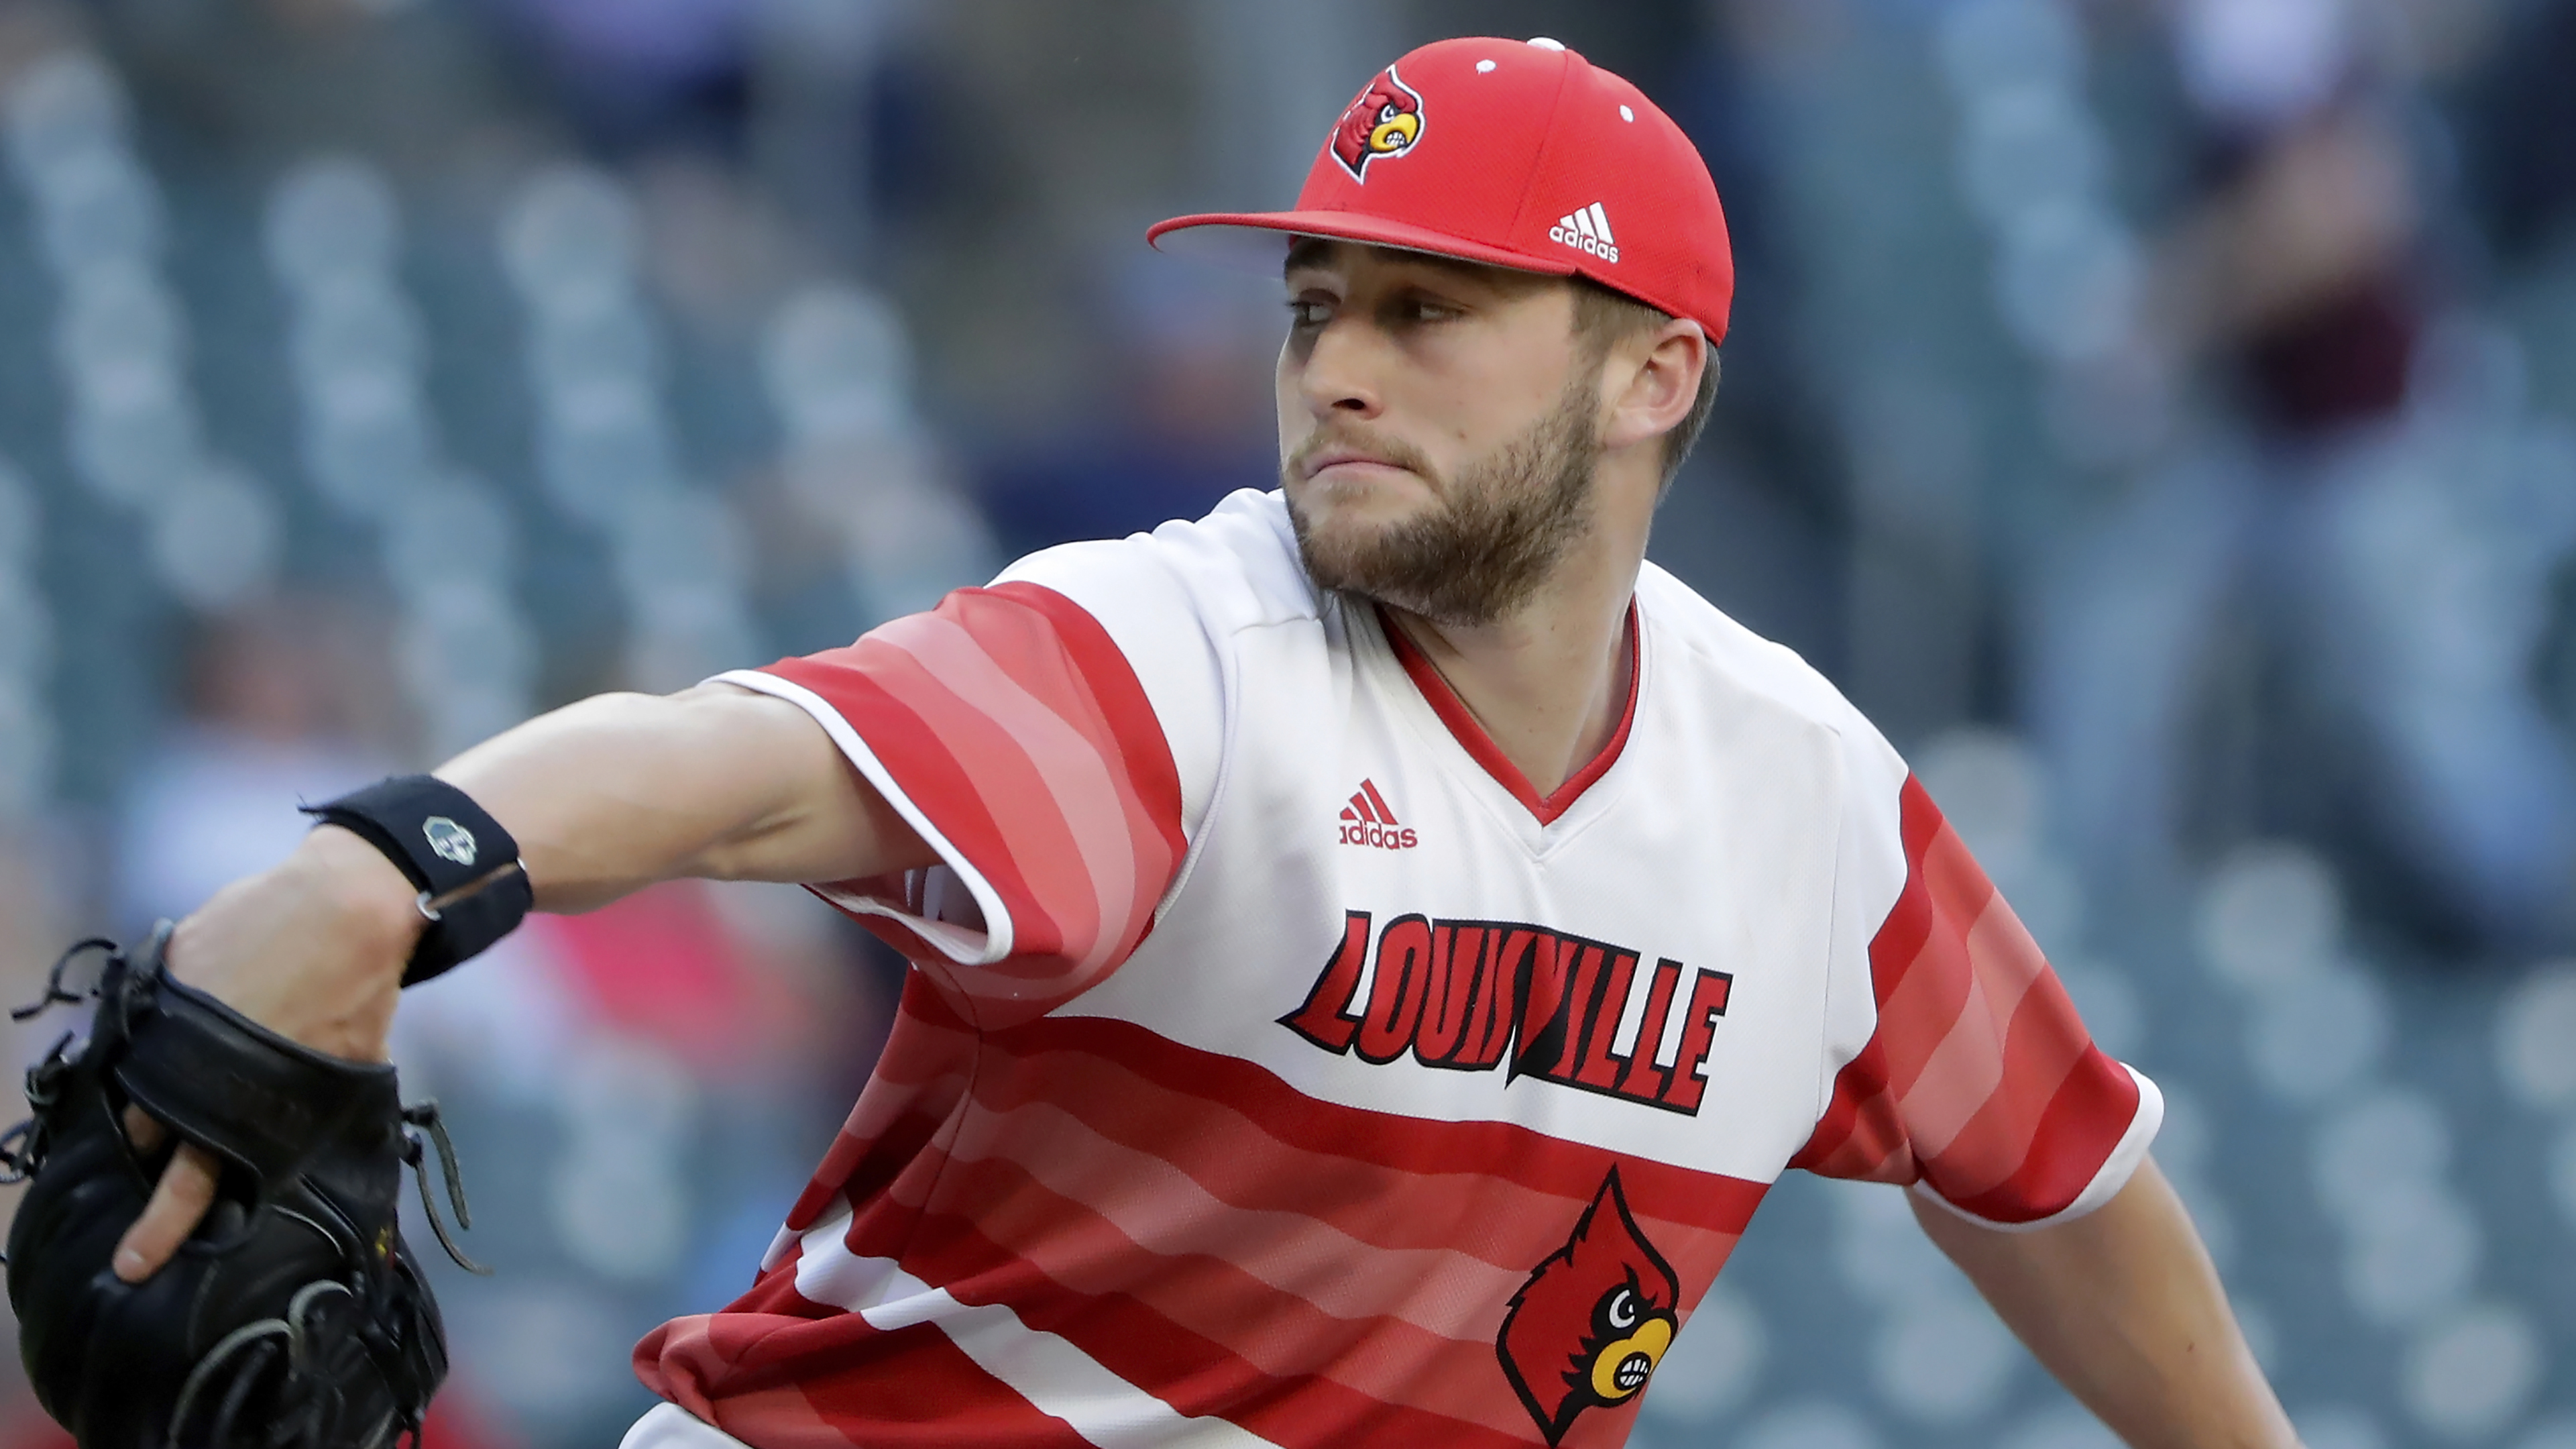 MLB Draft 2021: Who could be the Louisville baseball players drafted?